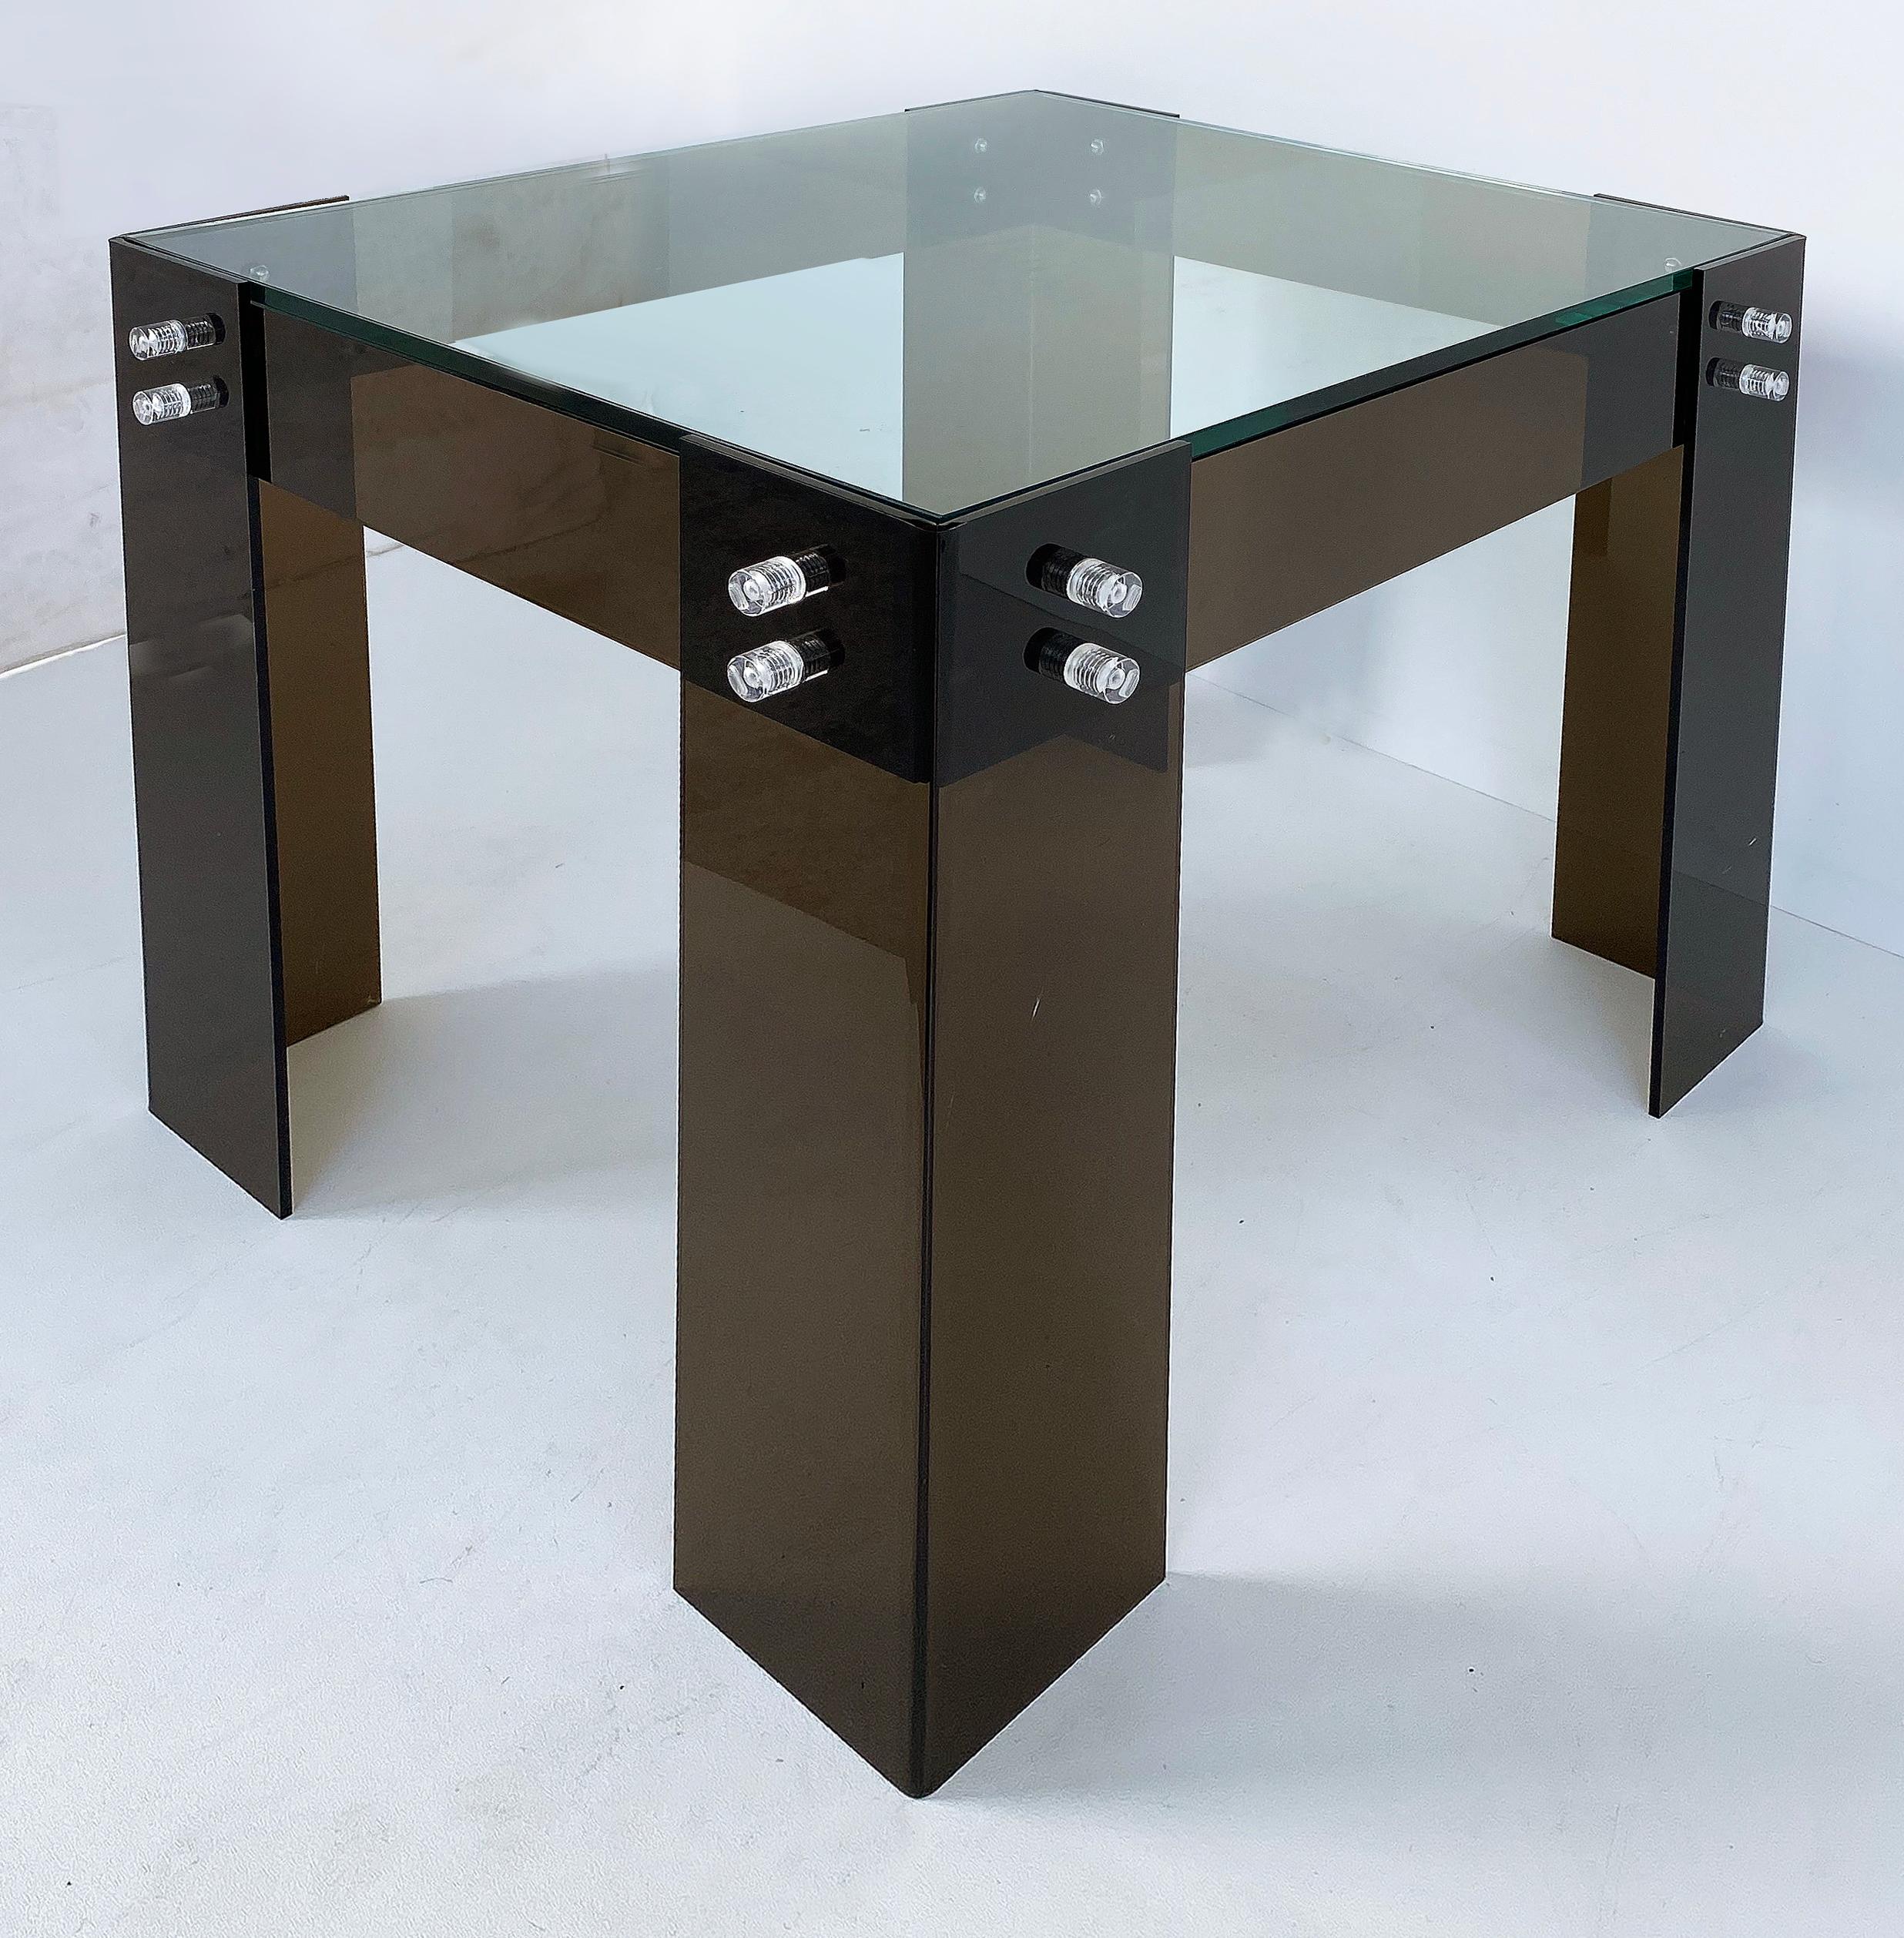 Mid-Century Modern brown lucite side table with inset glass top

Offered for sale is a stylish smoked -brown lucite Mid-Century Modern side table with an inset glass top. The table is secured by clear lucite screws on all sides.